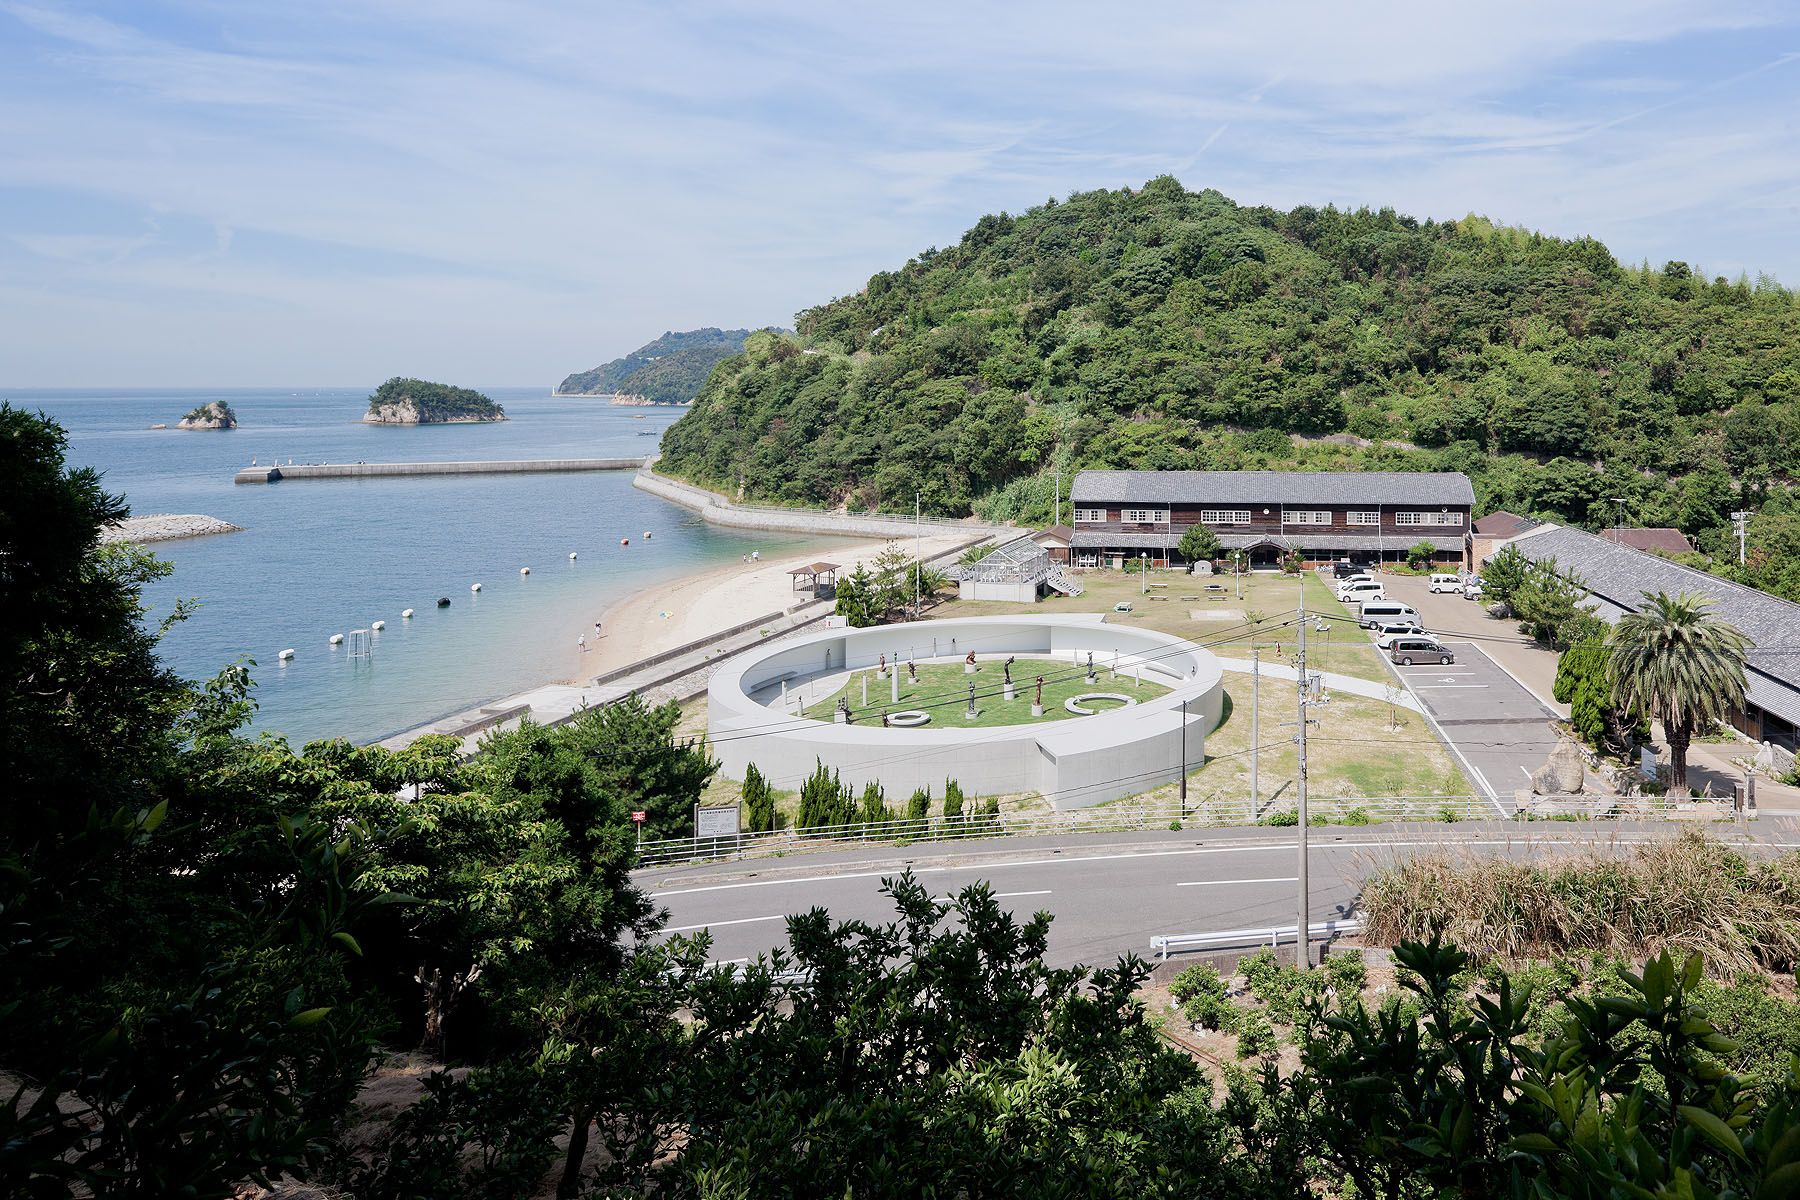 Ken Iwata Mother and Child Museum, Omishima Japan – Toyo Ito